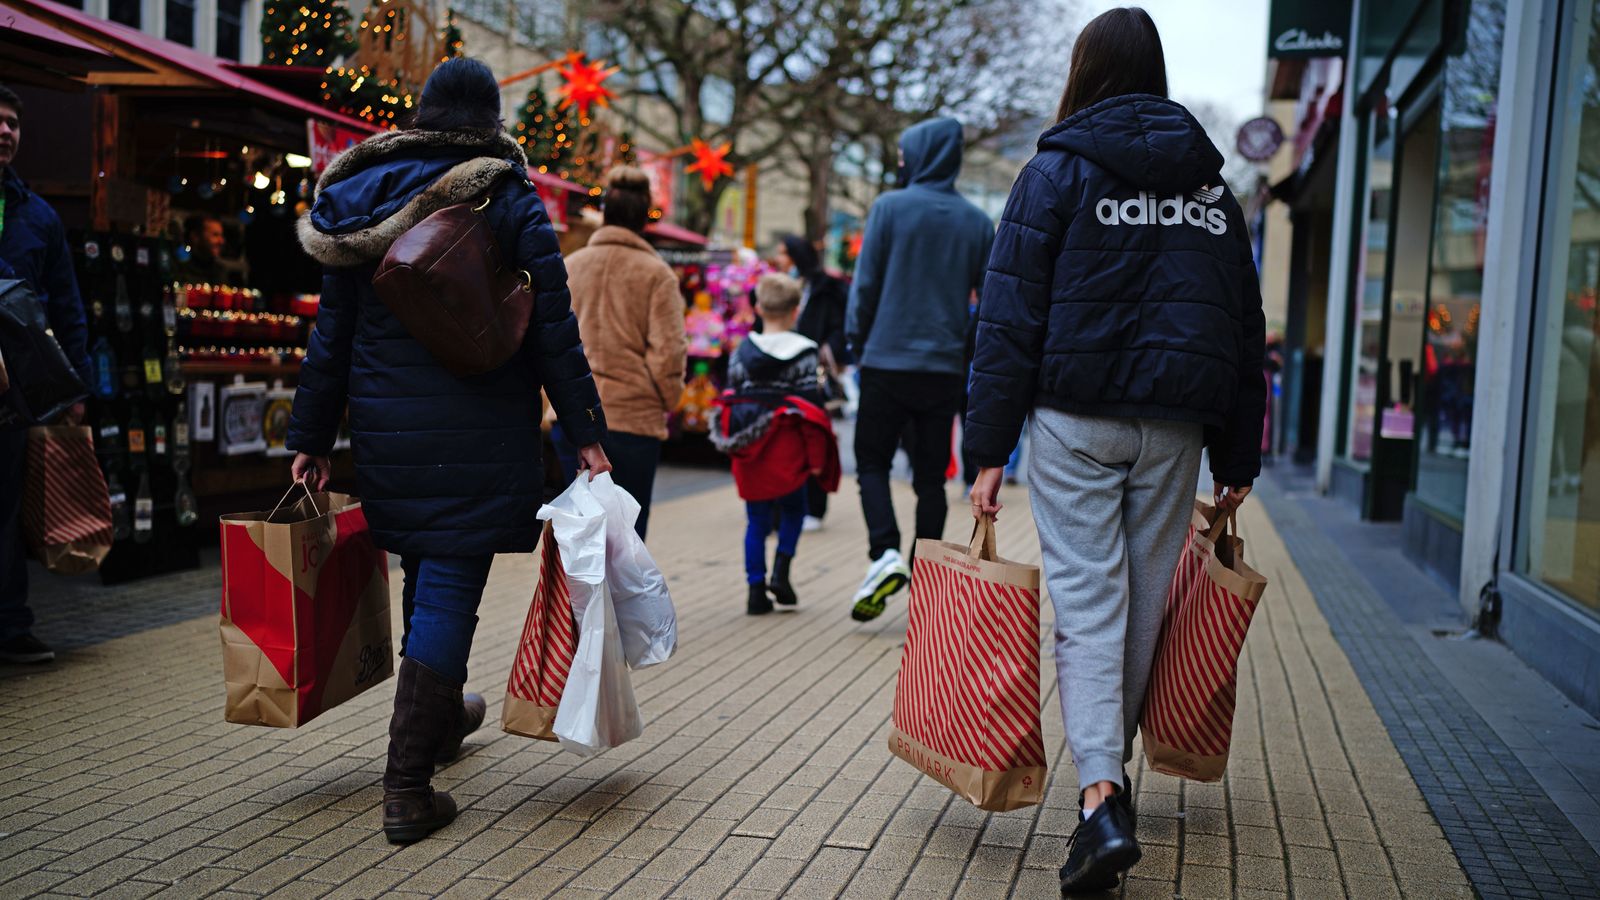 Cost of living: Shoppers curbed Christmas spending in blow to struggling retailers